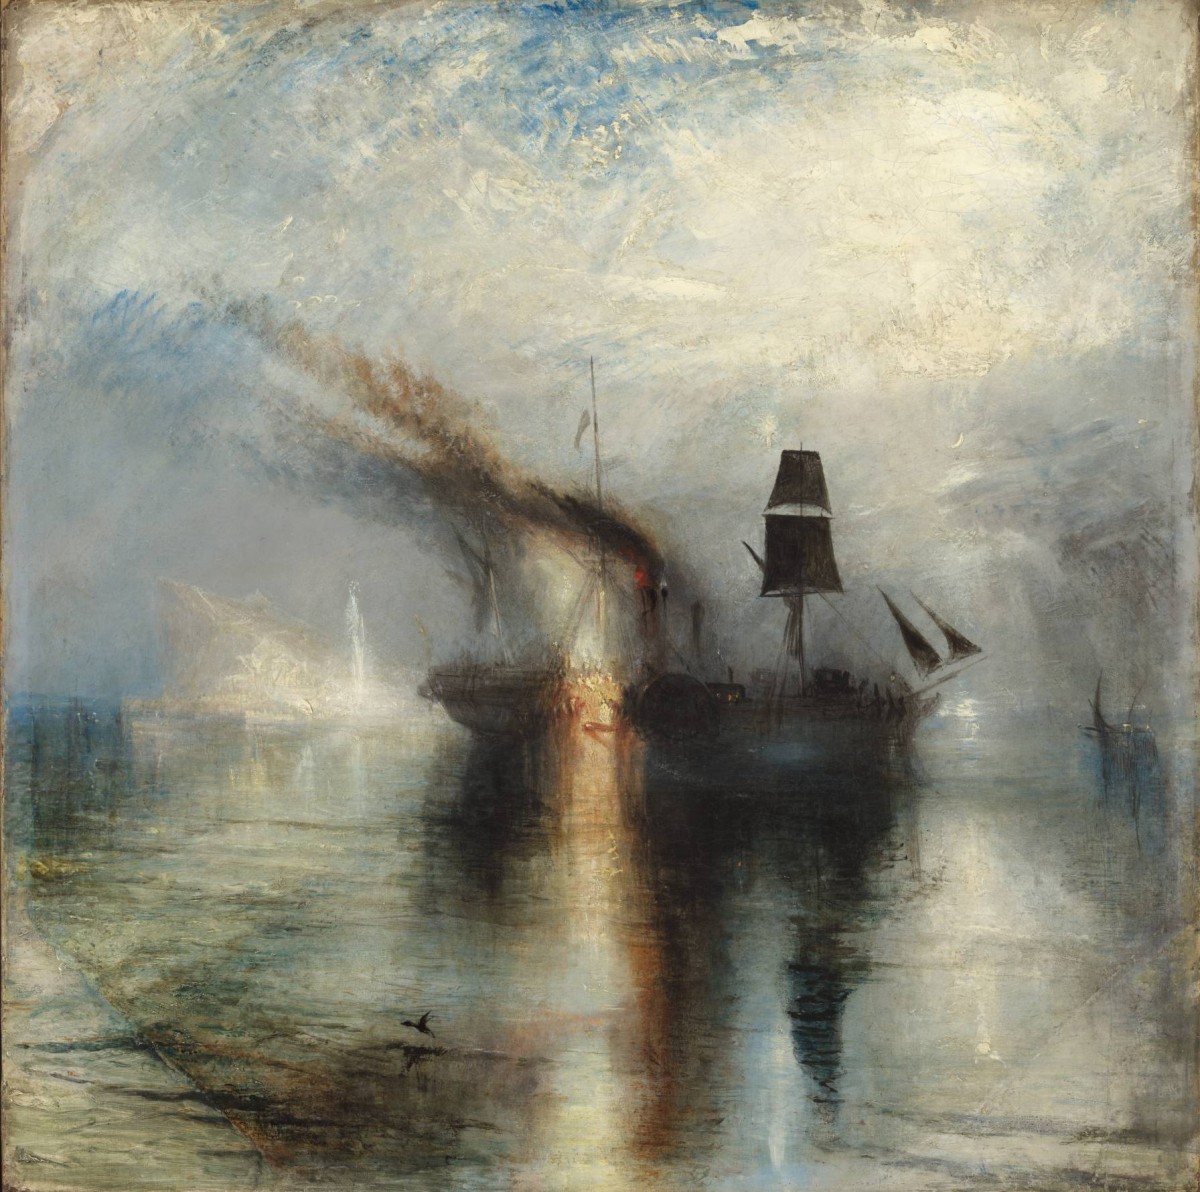 Peace – Burial at Sea, exhibited 1842. Oil paint on canvas, 111 x 110.8, Tate_ Accepted by the nation as part of the Turner Bequest. Photo: Tate